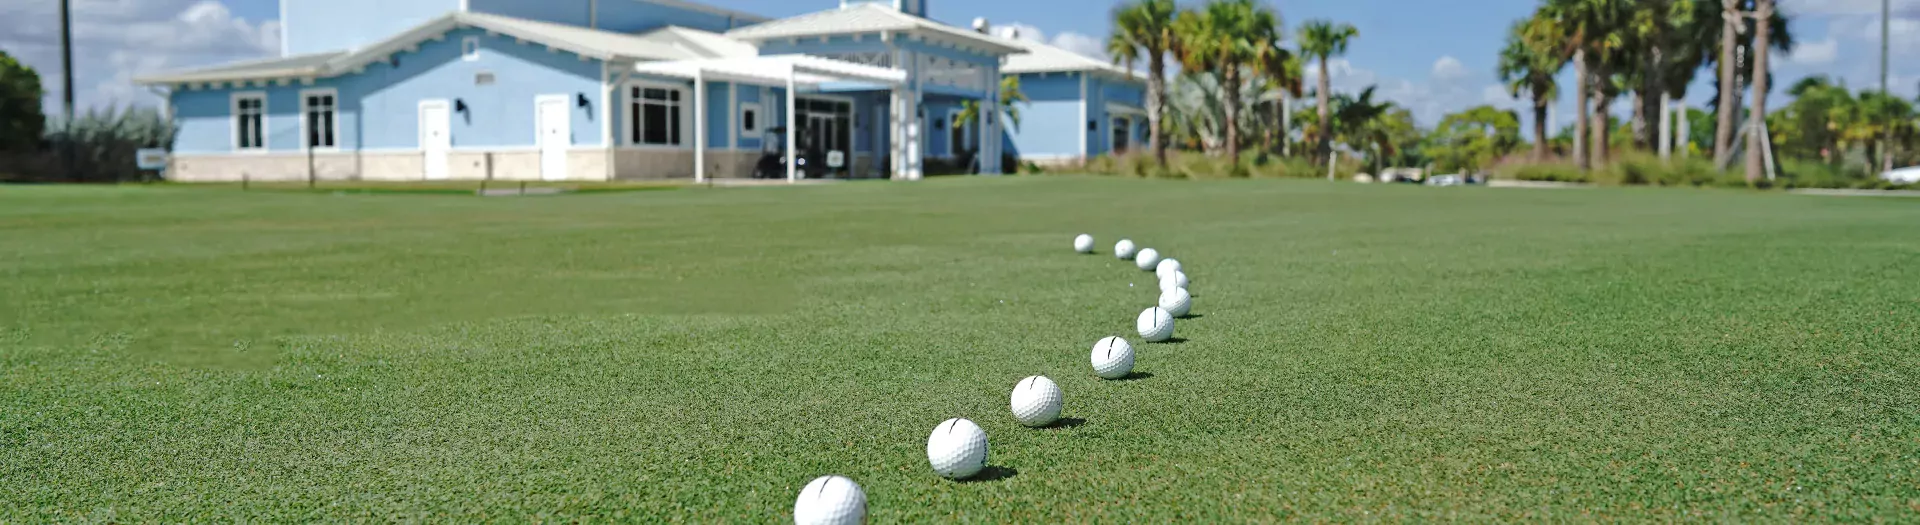 Image of golf balls on a putting green at Sailfish Sands Golf Course